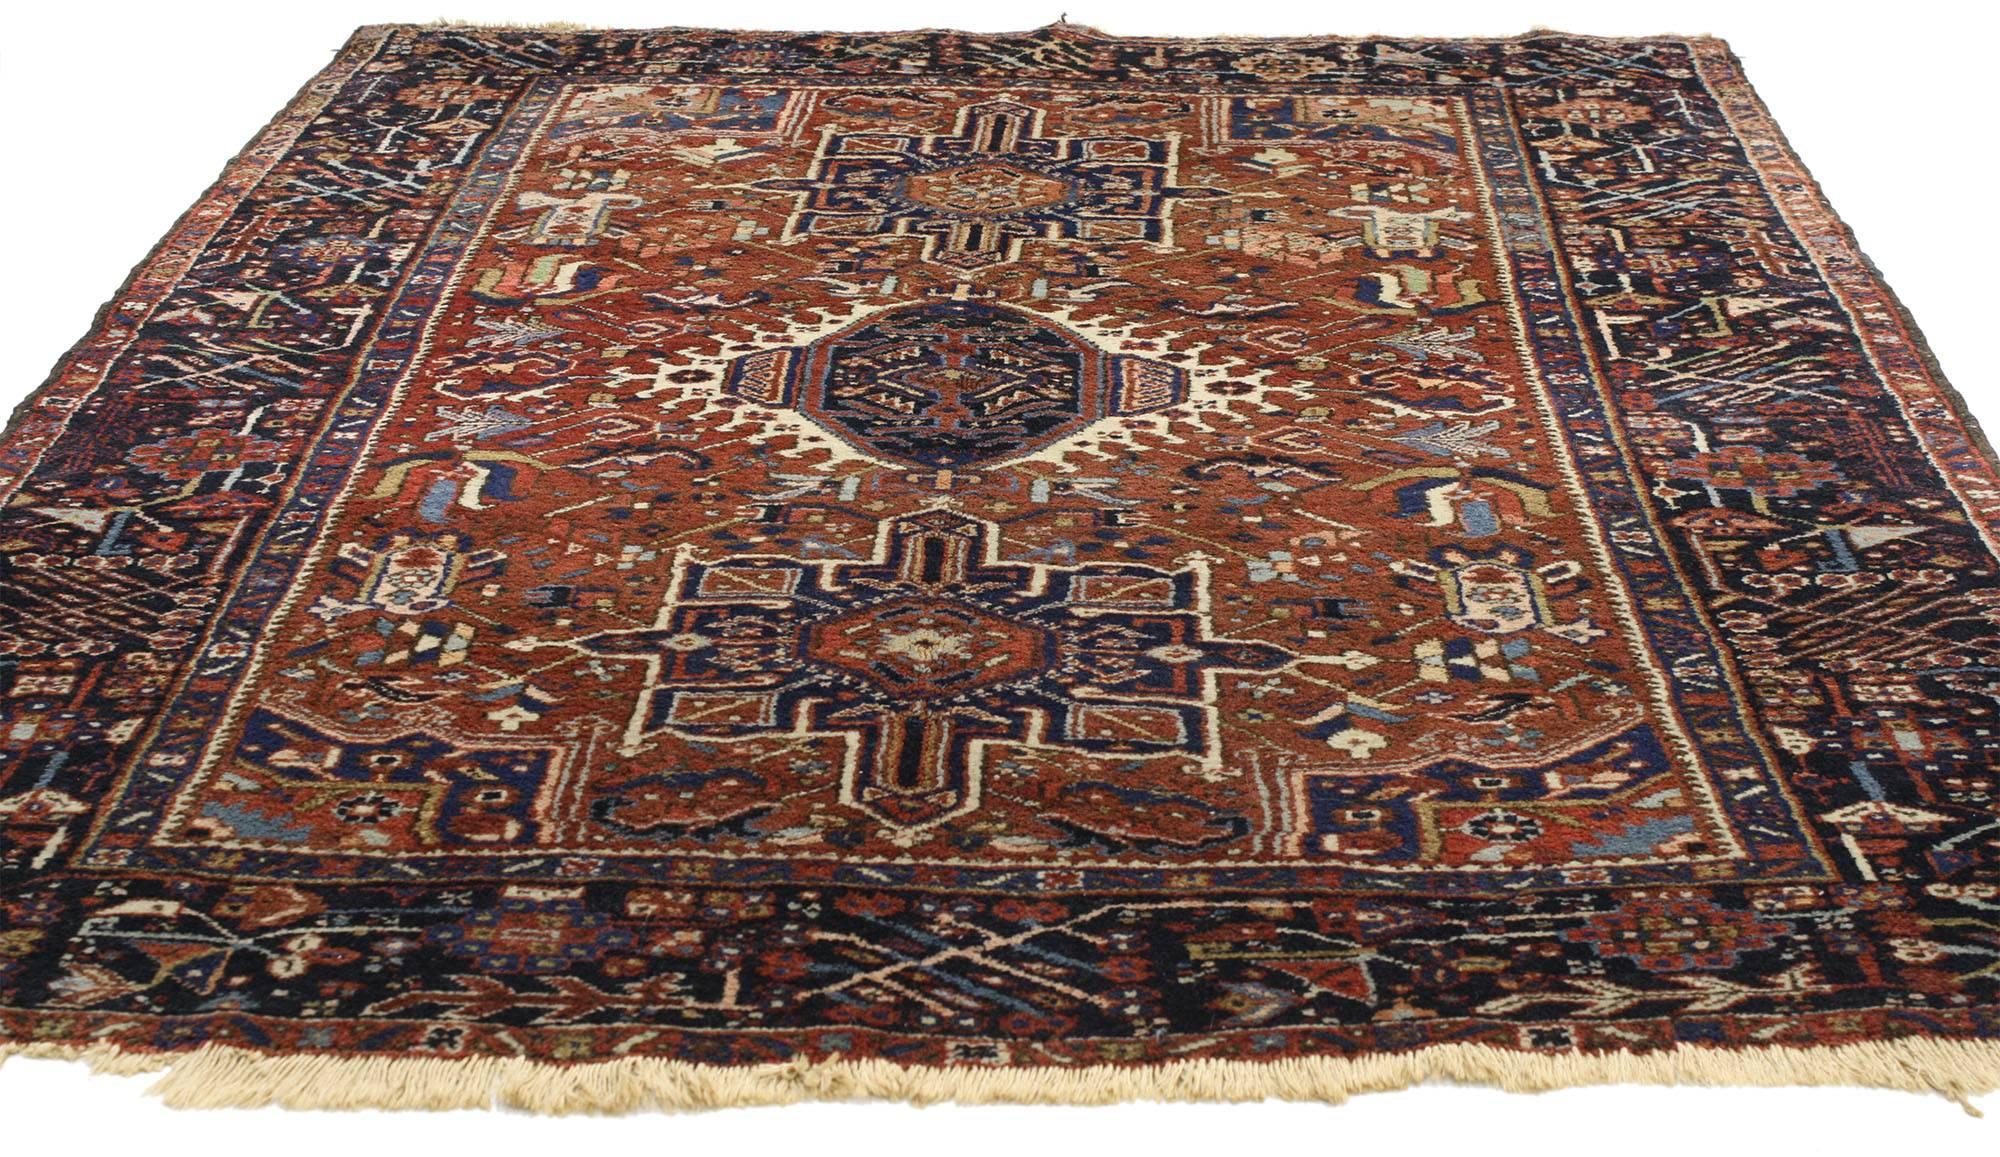 77066 Antique Persian Heriz rug with medallion and cruciform motif. This opulent antique Persian Heriz rug features a central medallion outlined in a geometric Stark ivory thin border flanked by two cruciform style amulets in deep sapphire and